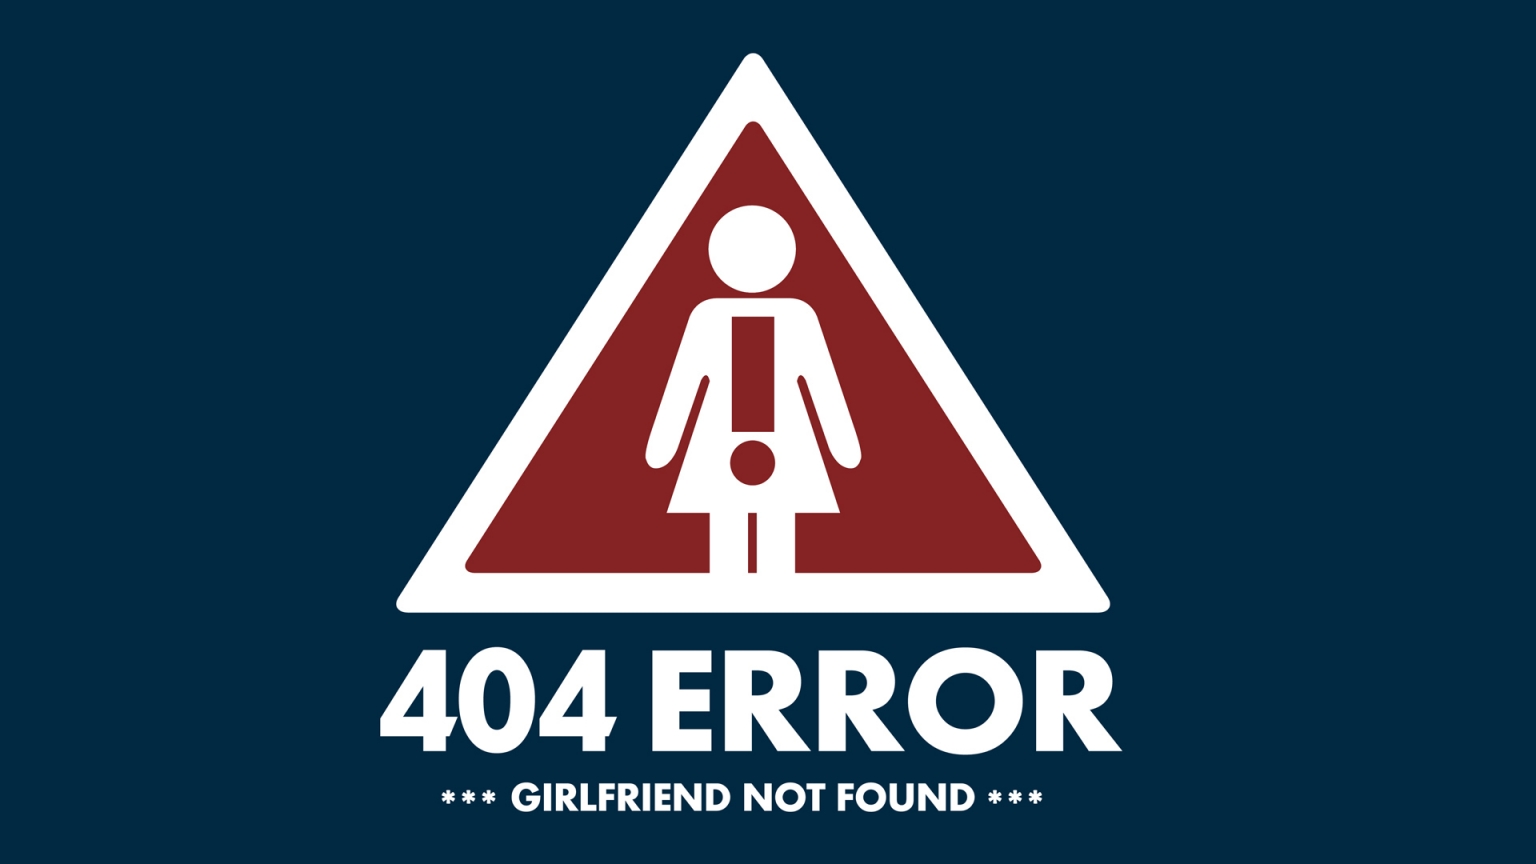 404 Error Page for 1536 x 864 HDTV resolution